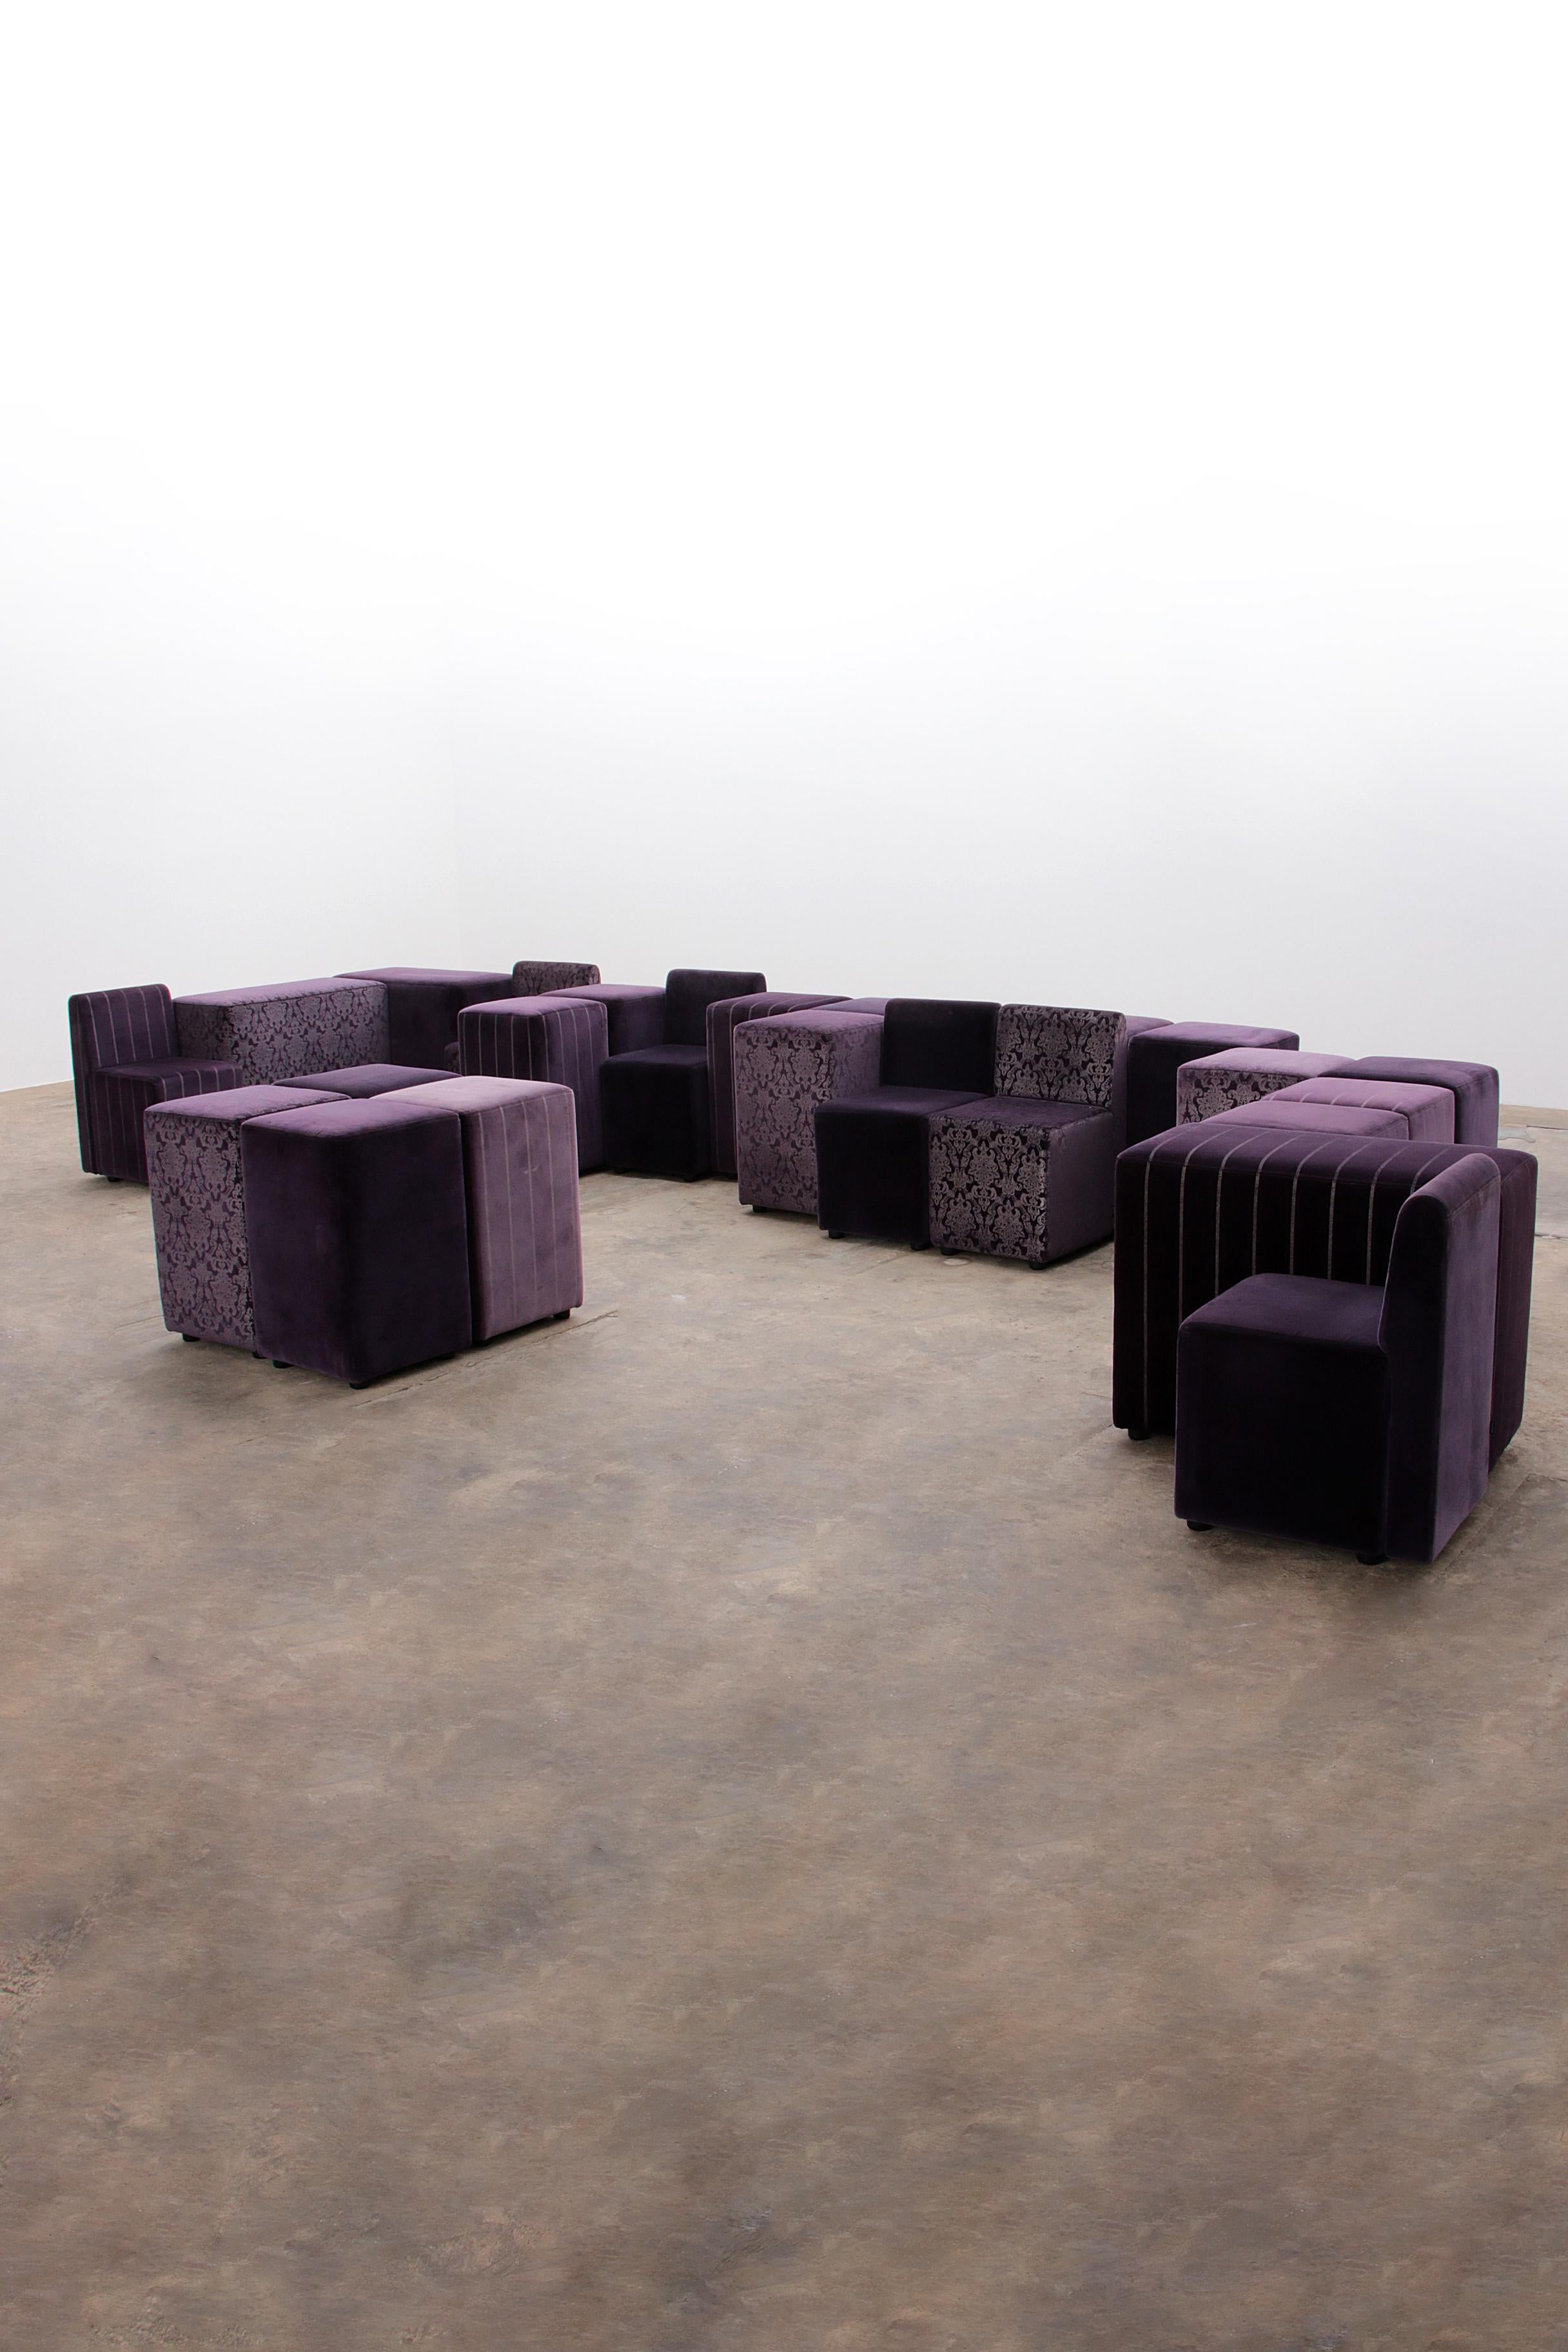 Discover the Johanson Velvet Modular Set, a beautiful addition to any hotel lobby or waiting room. This 25-piece set, in a striking purple color, offers a combination of style, comfort and versatility. The set consists of chairs, small and large